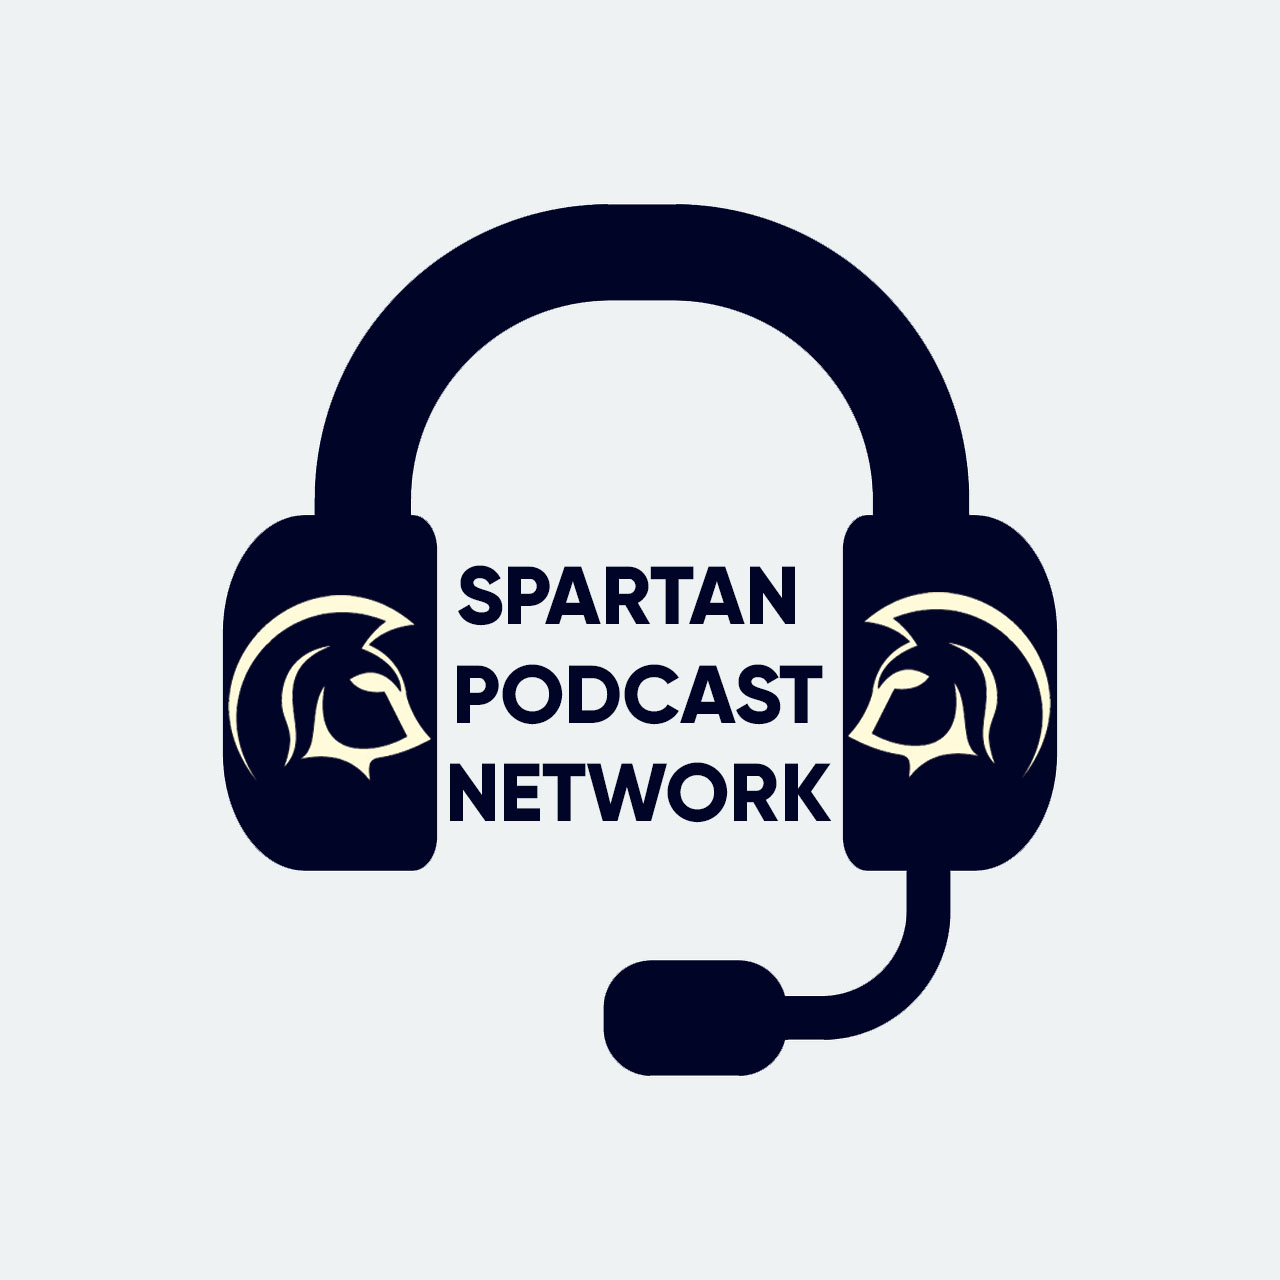 The Spartan Podcast Network